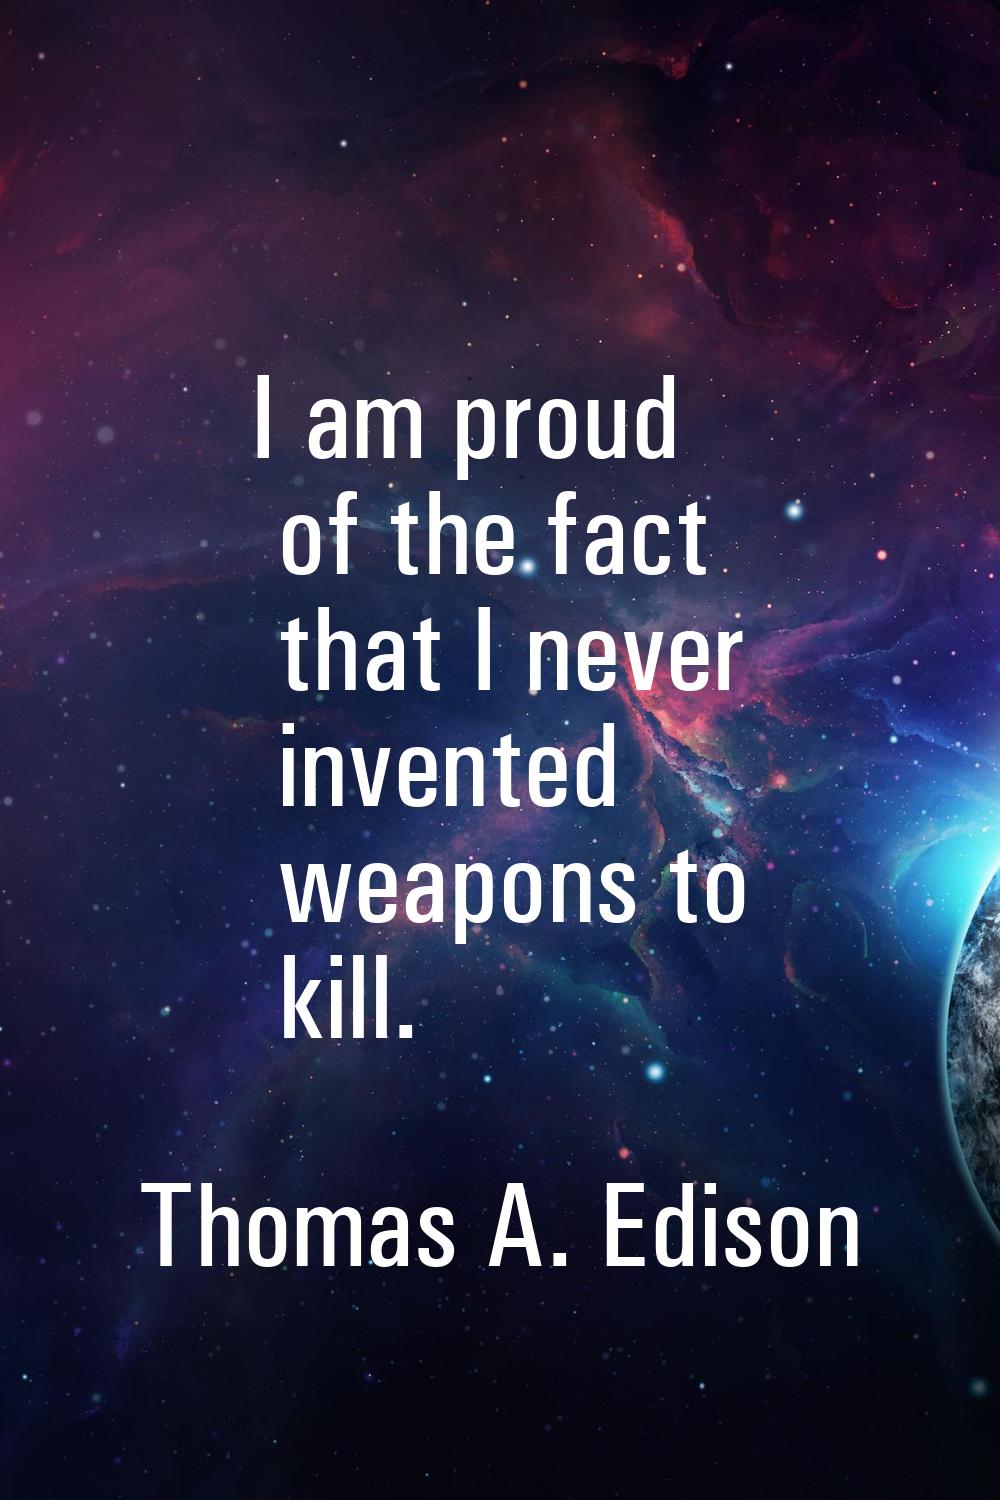 I am proud of the fact that I never invented weapons to kill.